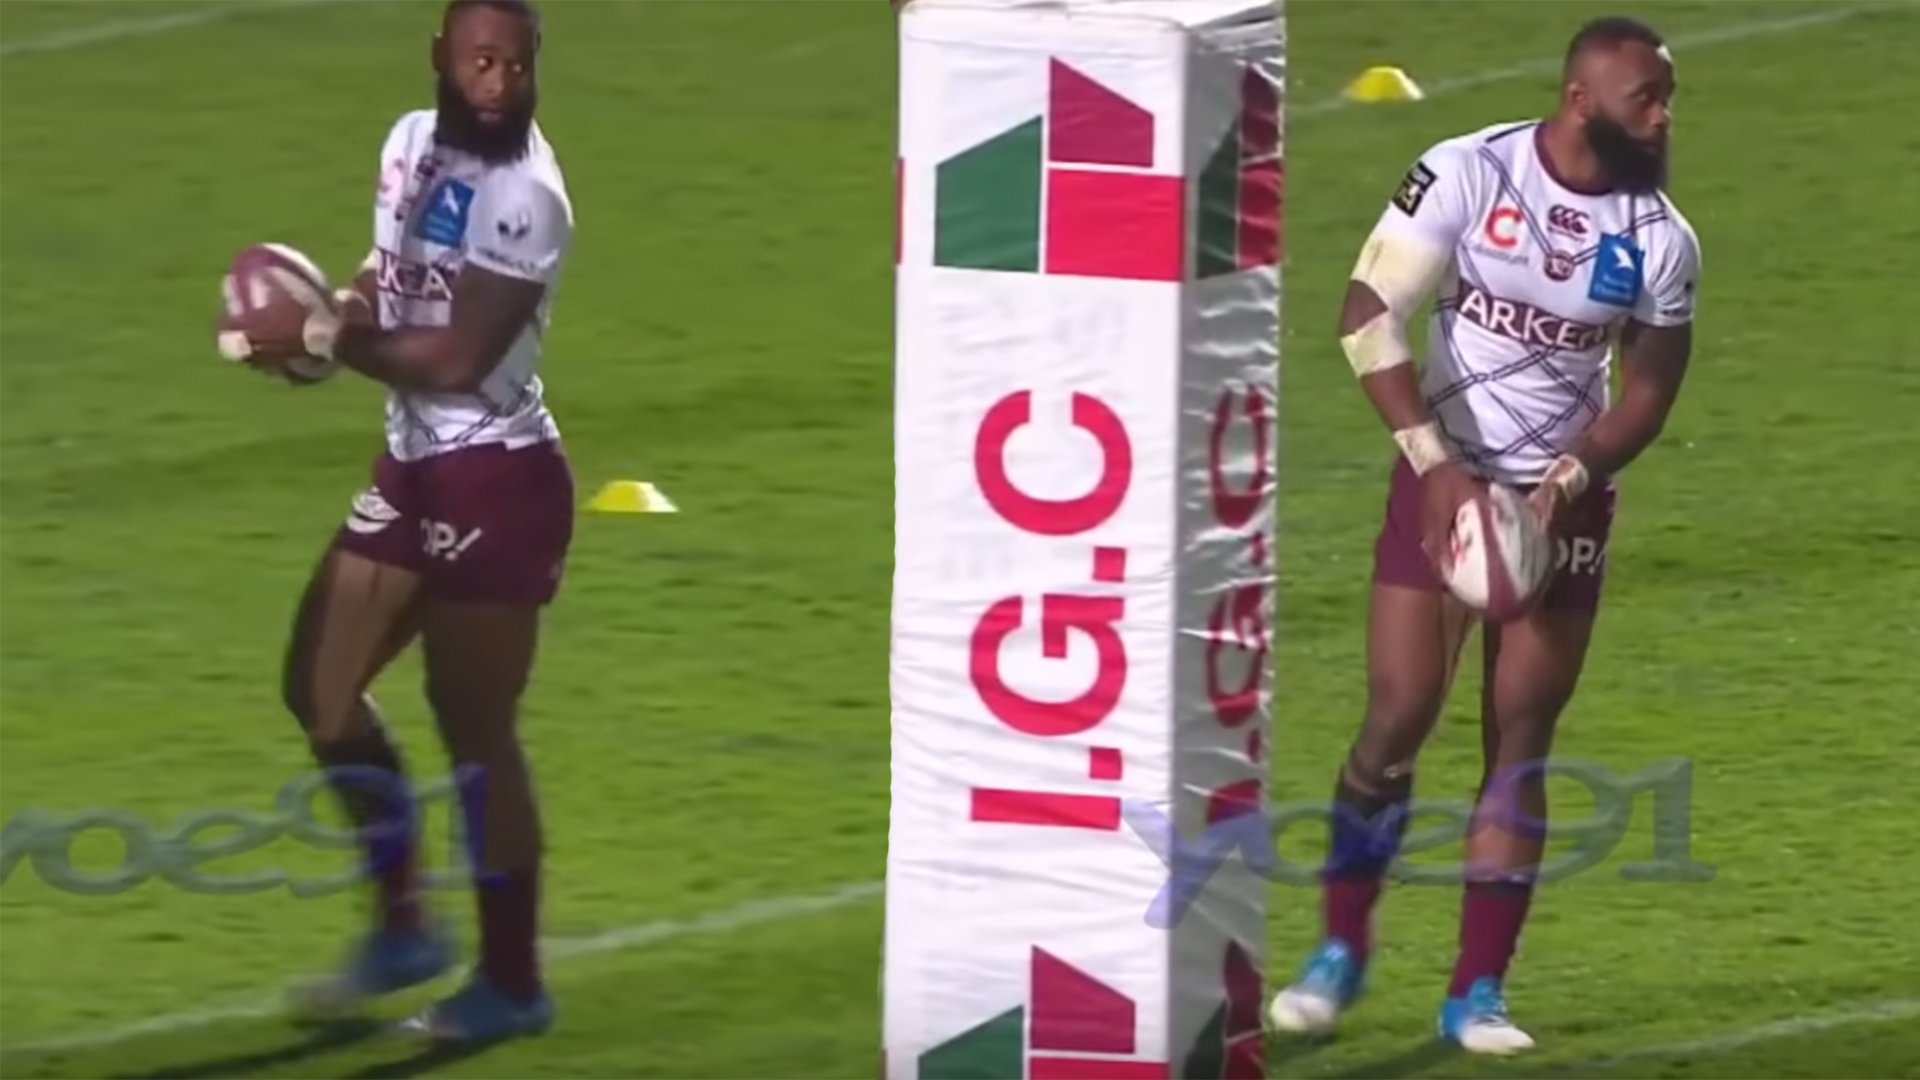 Unsettling video shows Semi Radradra refusing to finish tries, instead gifting passes to teammates